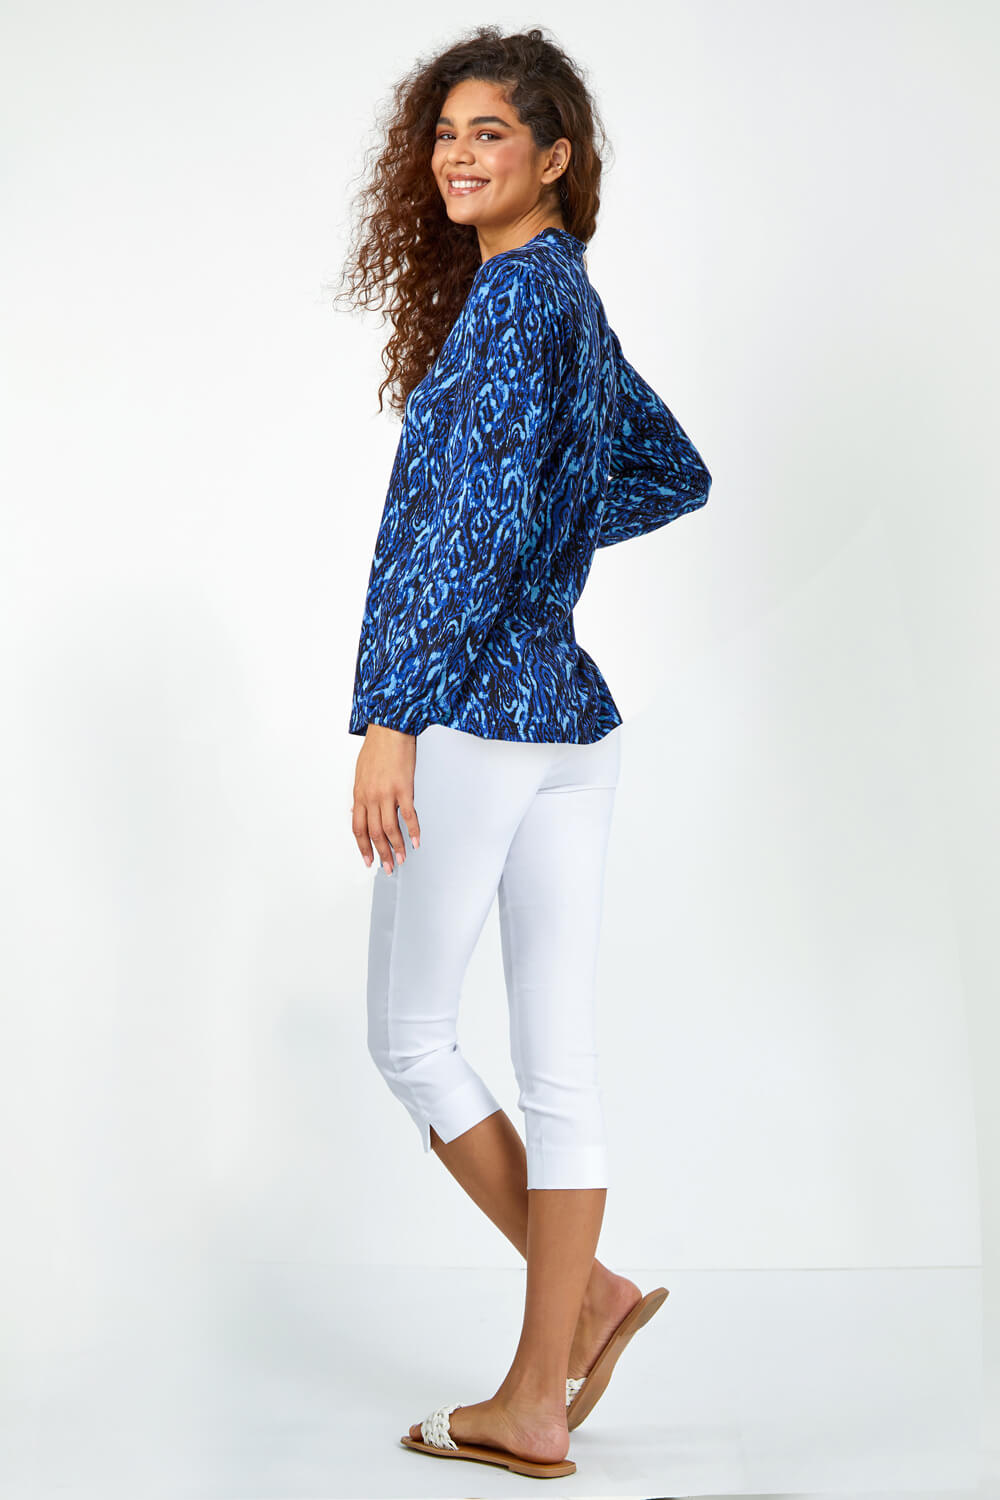 Blue Aztec Print Pleated Stretch Top, Image 3 of 5